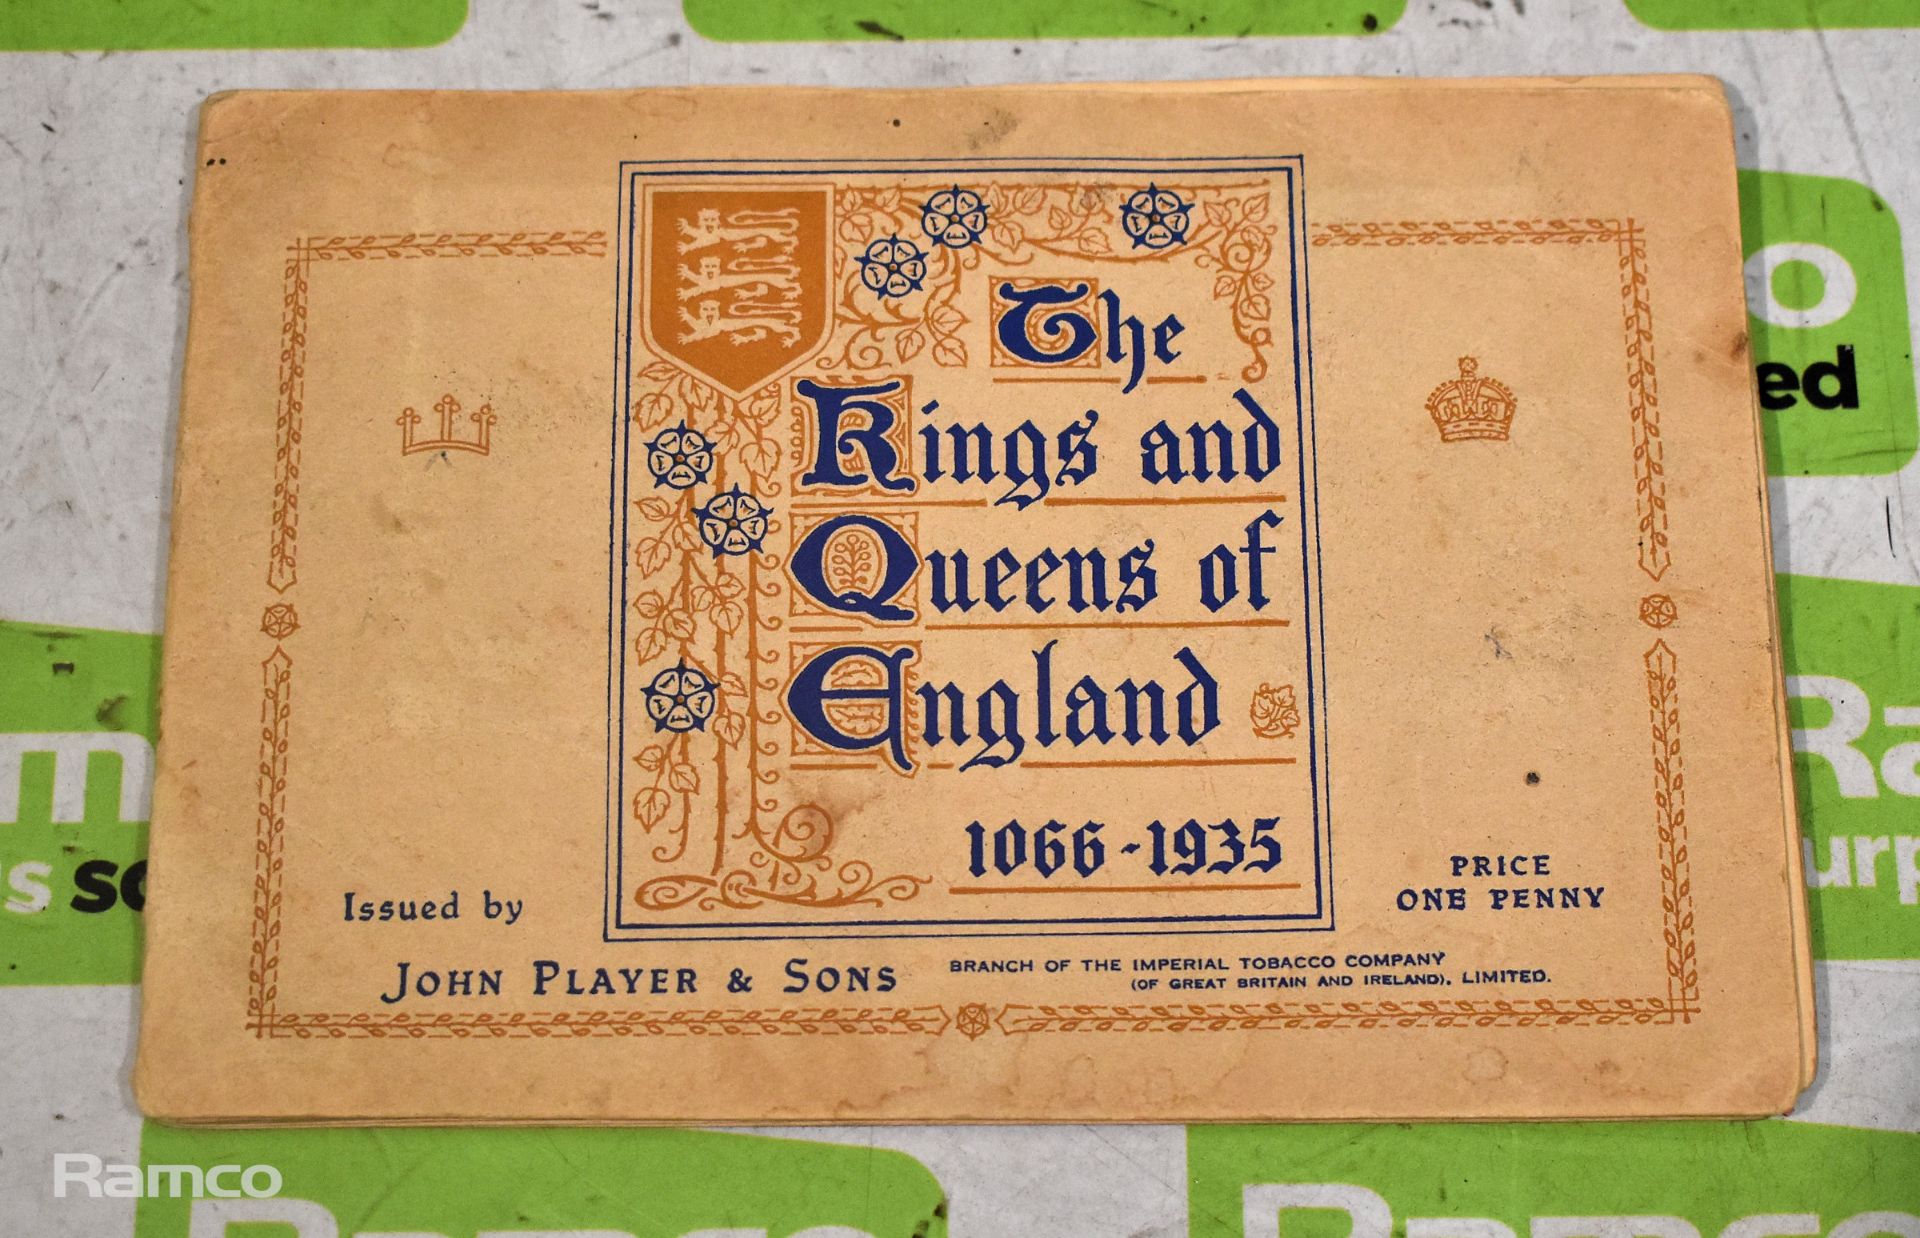 John Player & Sons - The Kings and Queens of England 1066-1935 picture card book